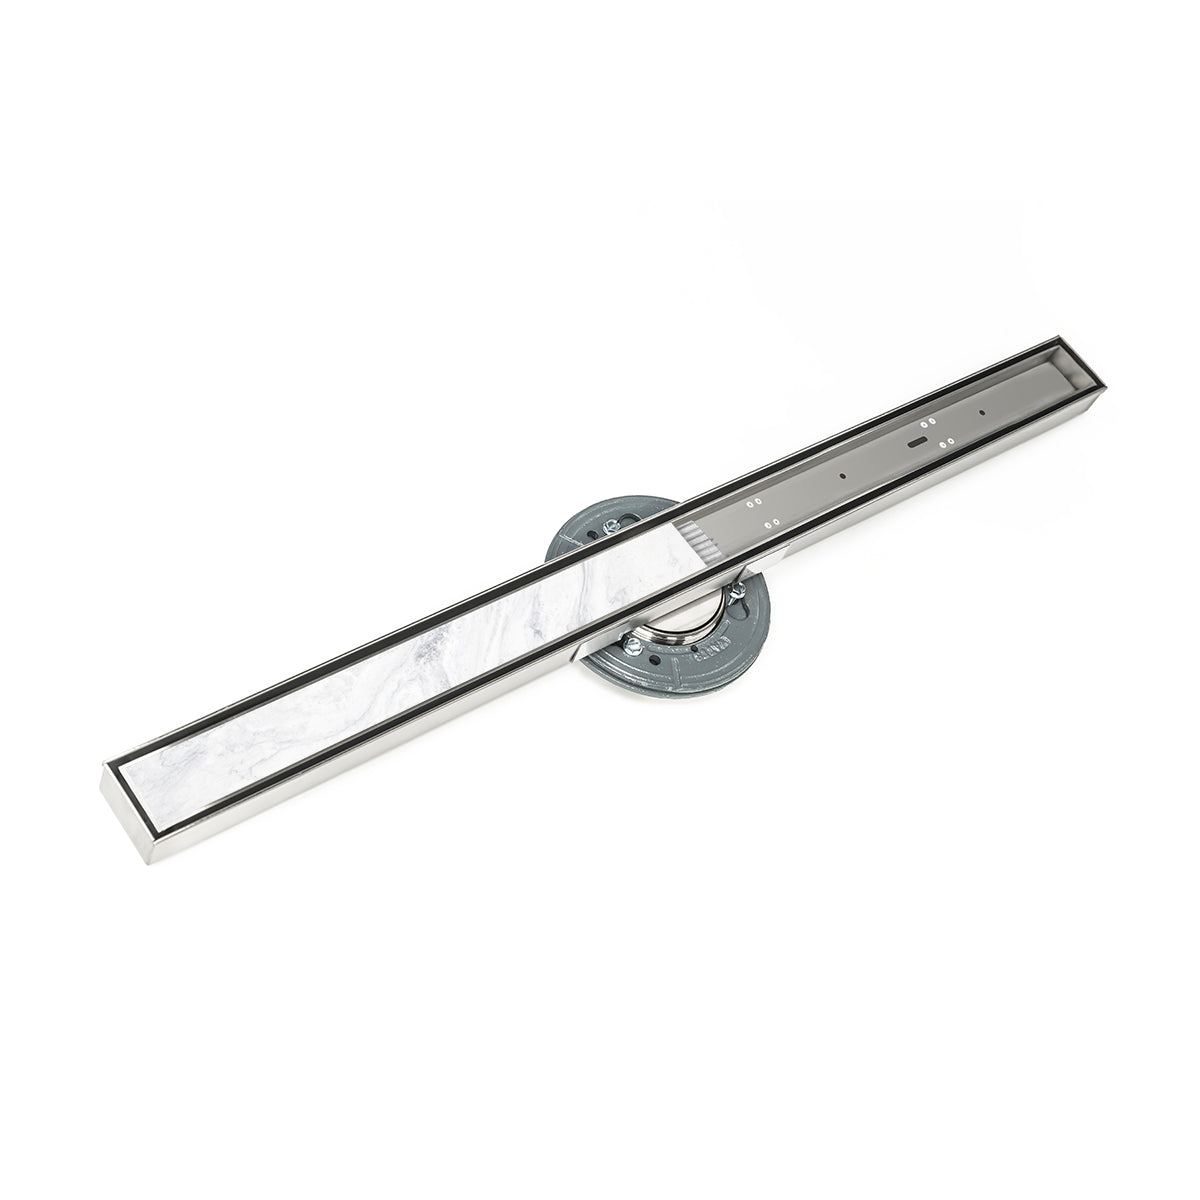 Infinity Drain 60" S-Stainless Steel Series High Flow Site Sizable Linear Drain Kit with Tile Insert Frame with ABS Drain Body, 3" Outlet